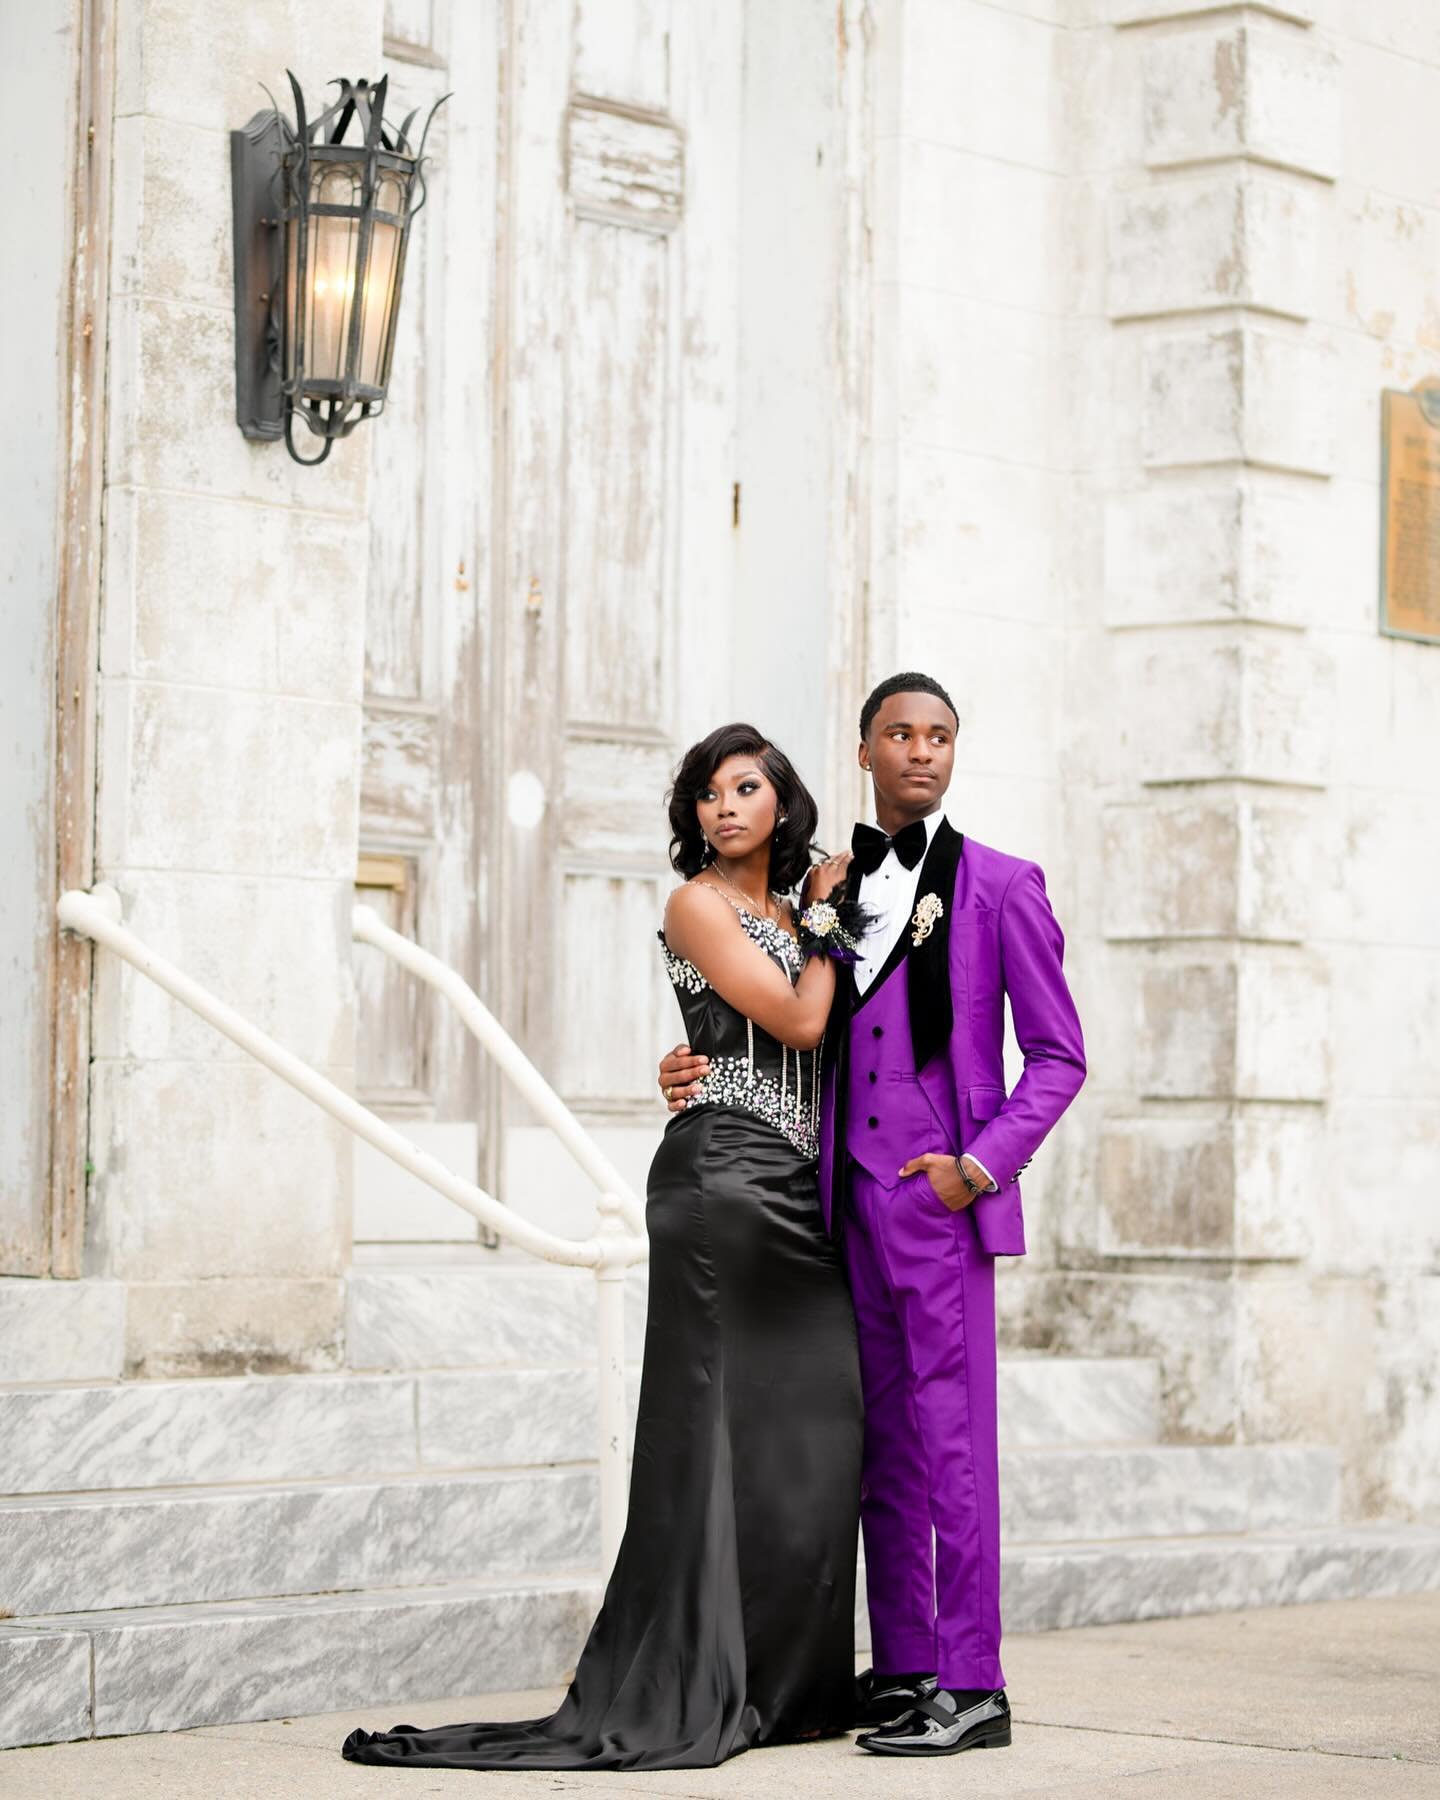 Why couldn&rsquo;t we be this cool when I was in school 20 years ago!? These kids are killing it for prom! The drip is unmatched. I&rsquo;m so happy to be a part of these milestones for Jahan. He&rsquo;s off to Alabama for college now. 👨🏾&zwj;🎓